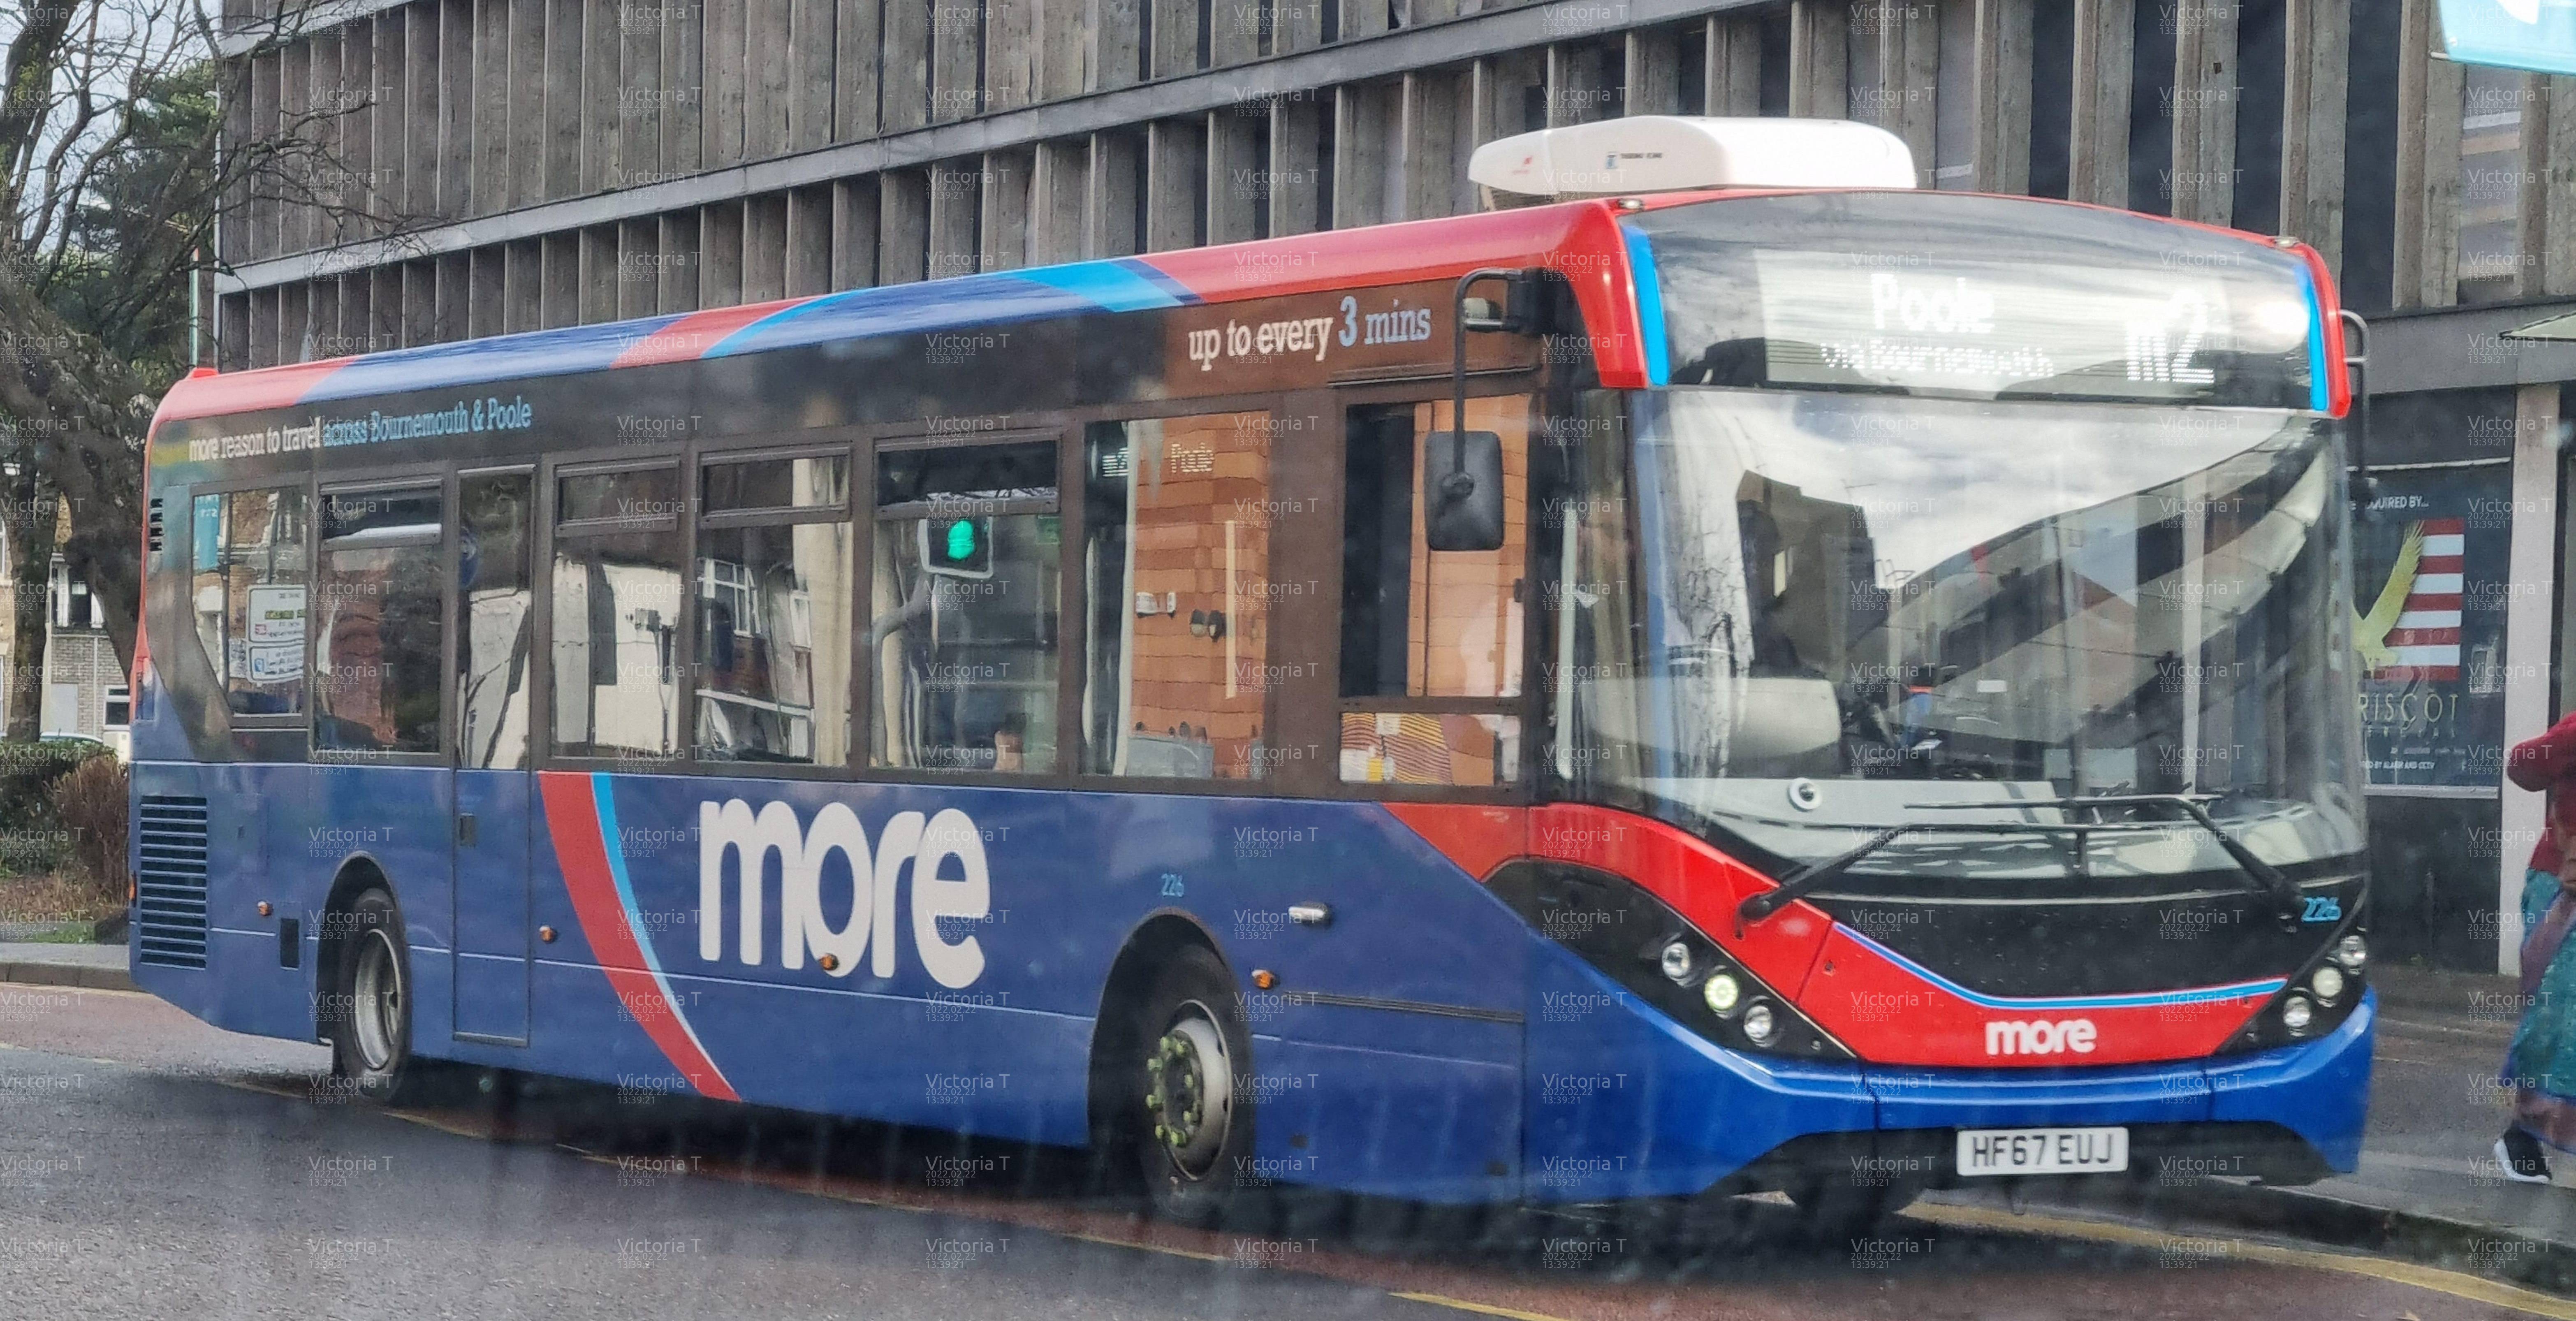 Picture of an ADL Enviro200 MMC vehicle, Image credited to Victoria T.